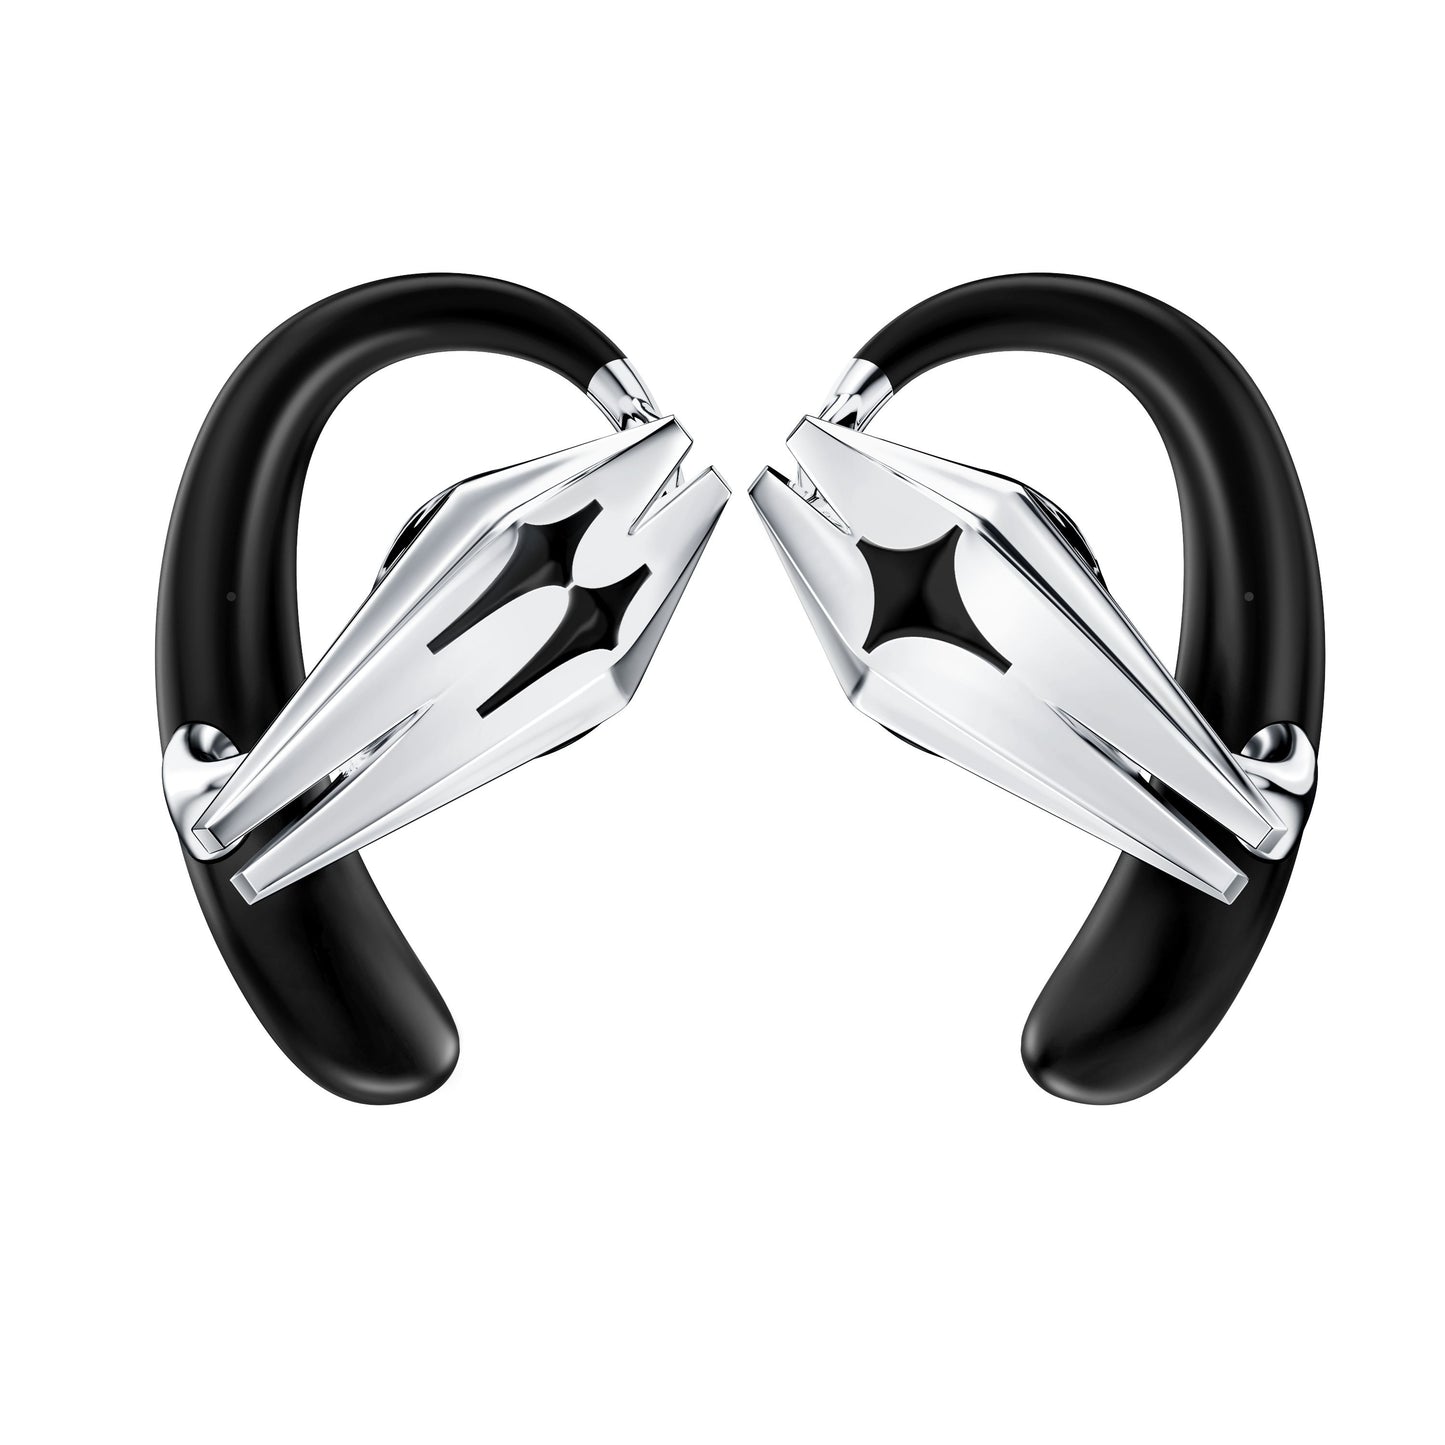 STARSHIP - OWS Open-Style Accessory Headphones